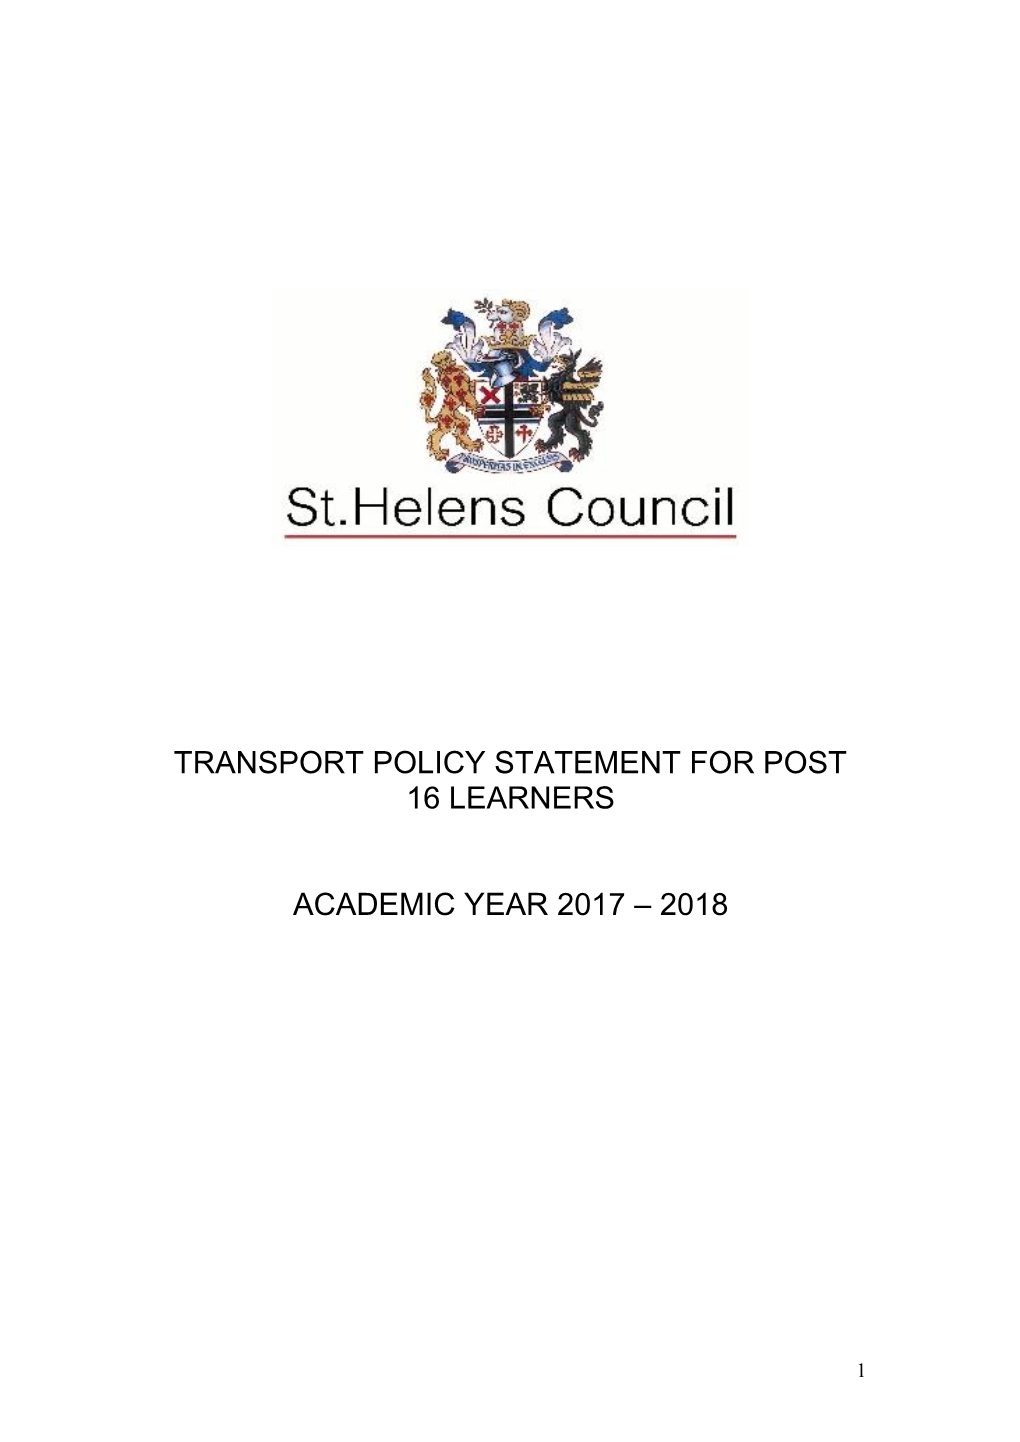 Transport Policy 2017